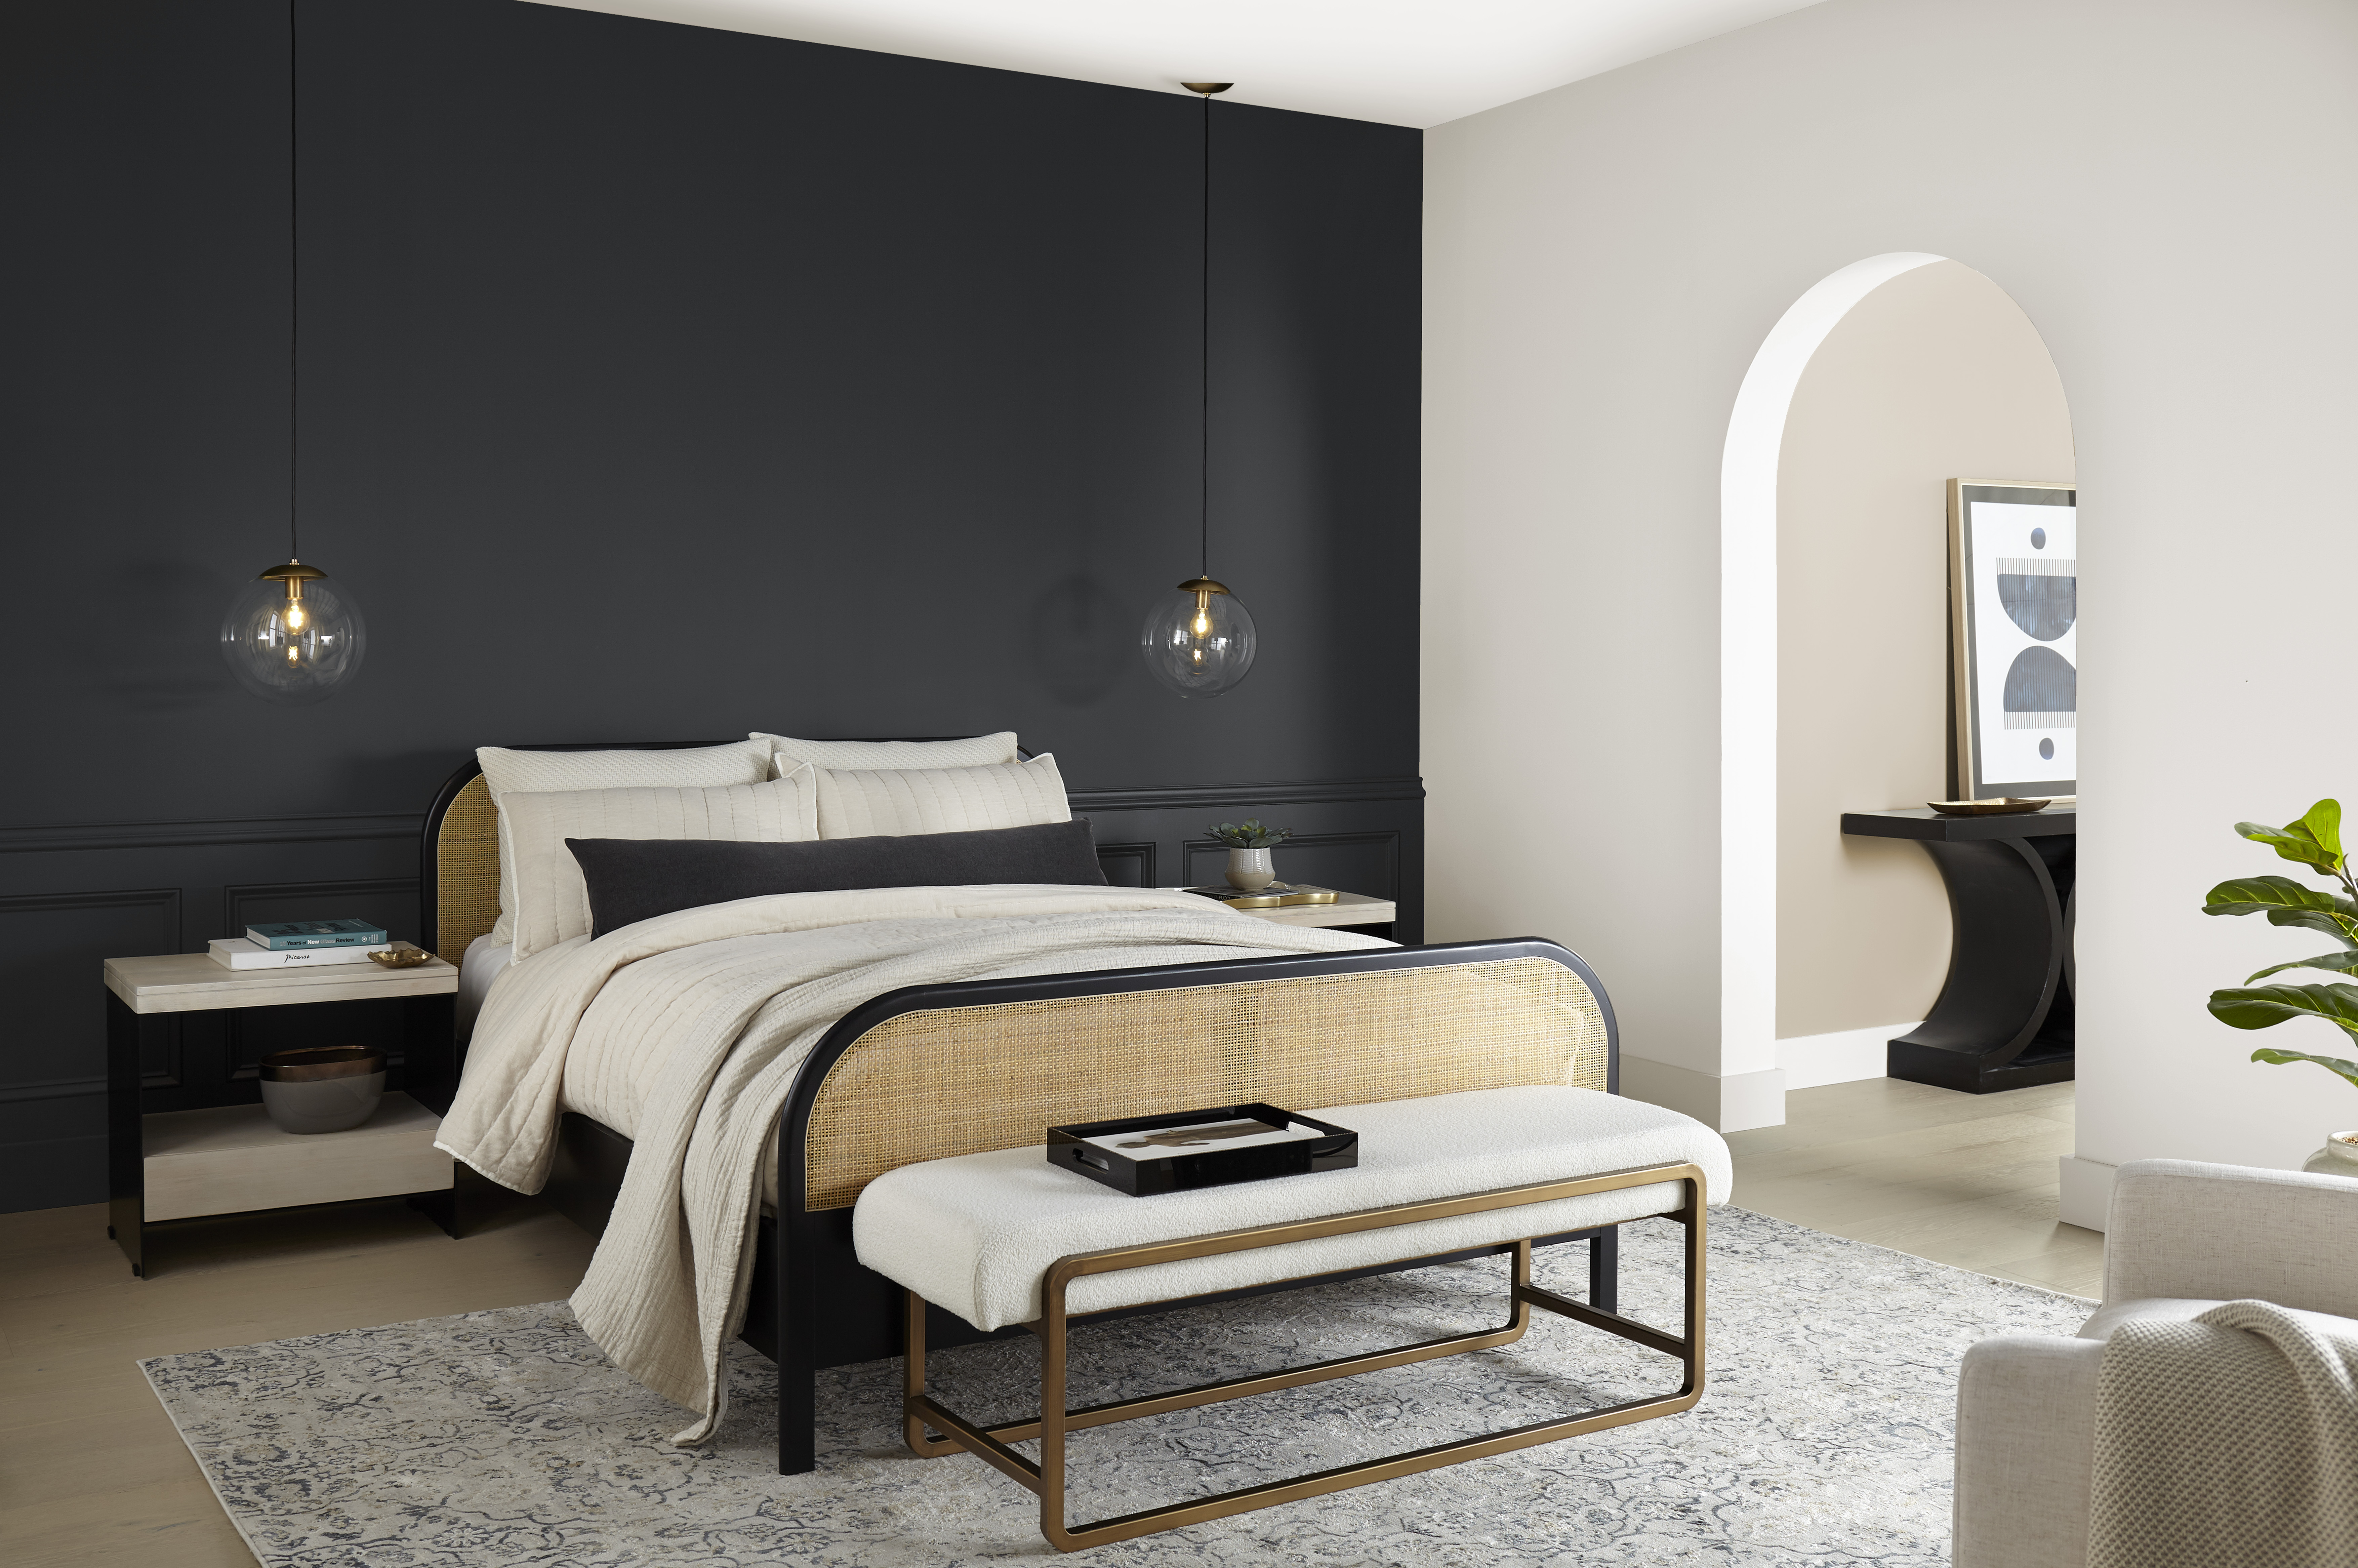 A modern bedroom with one wall in the colour Cracked Pepper and the other in Even Better Beige